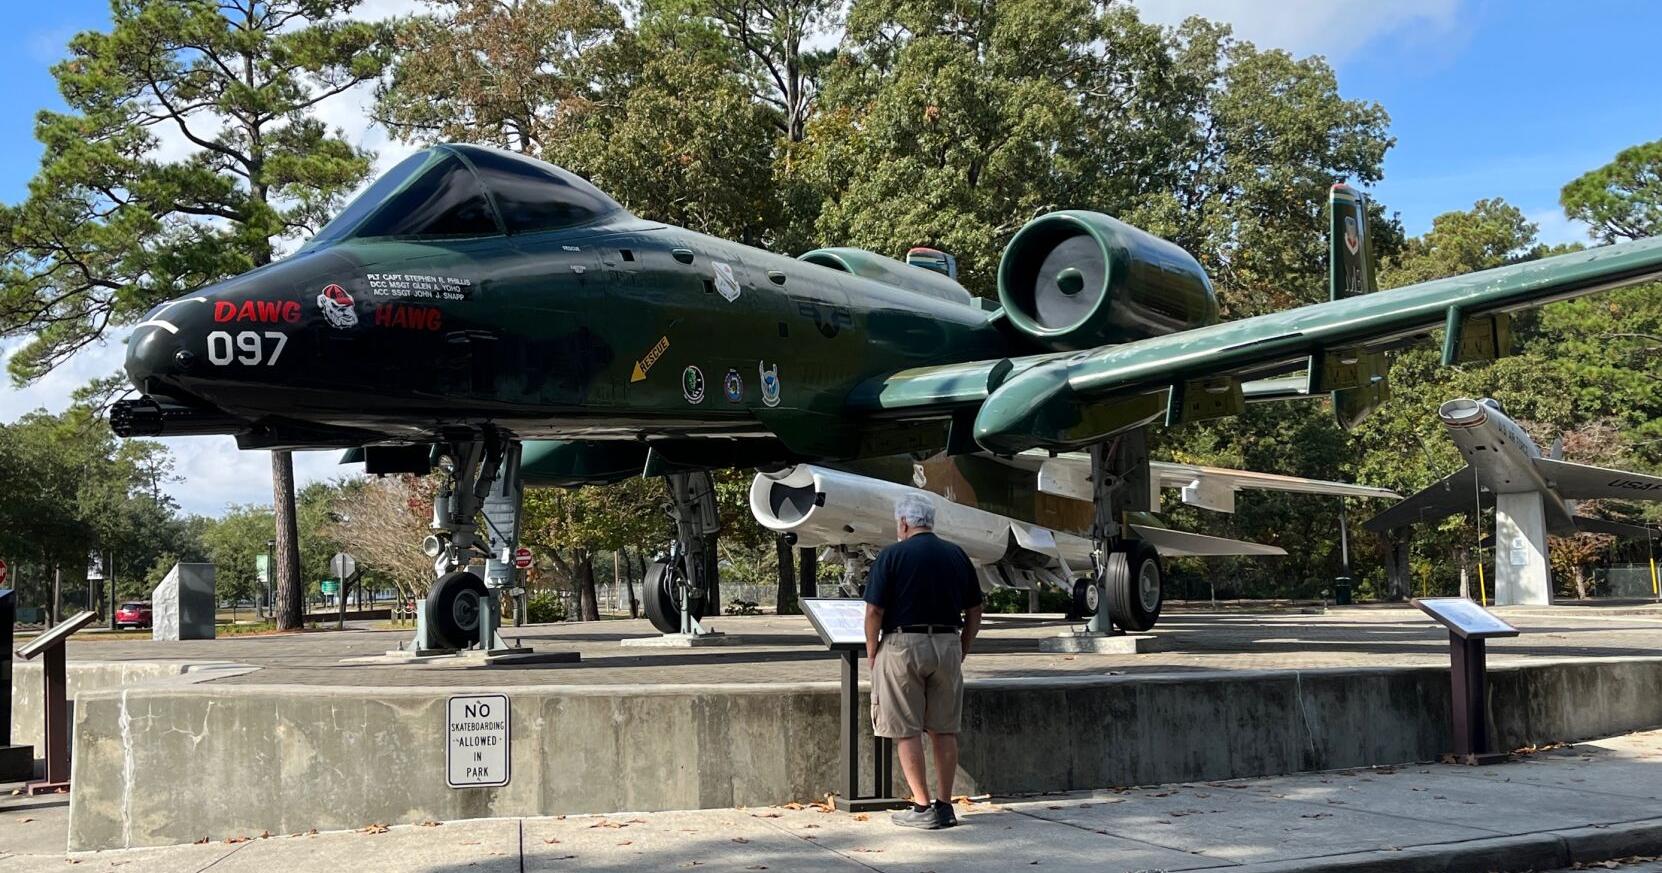 Construction of Myrtle Beach WWII memorial will start this summer